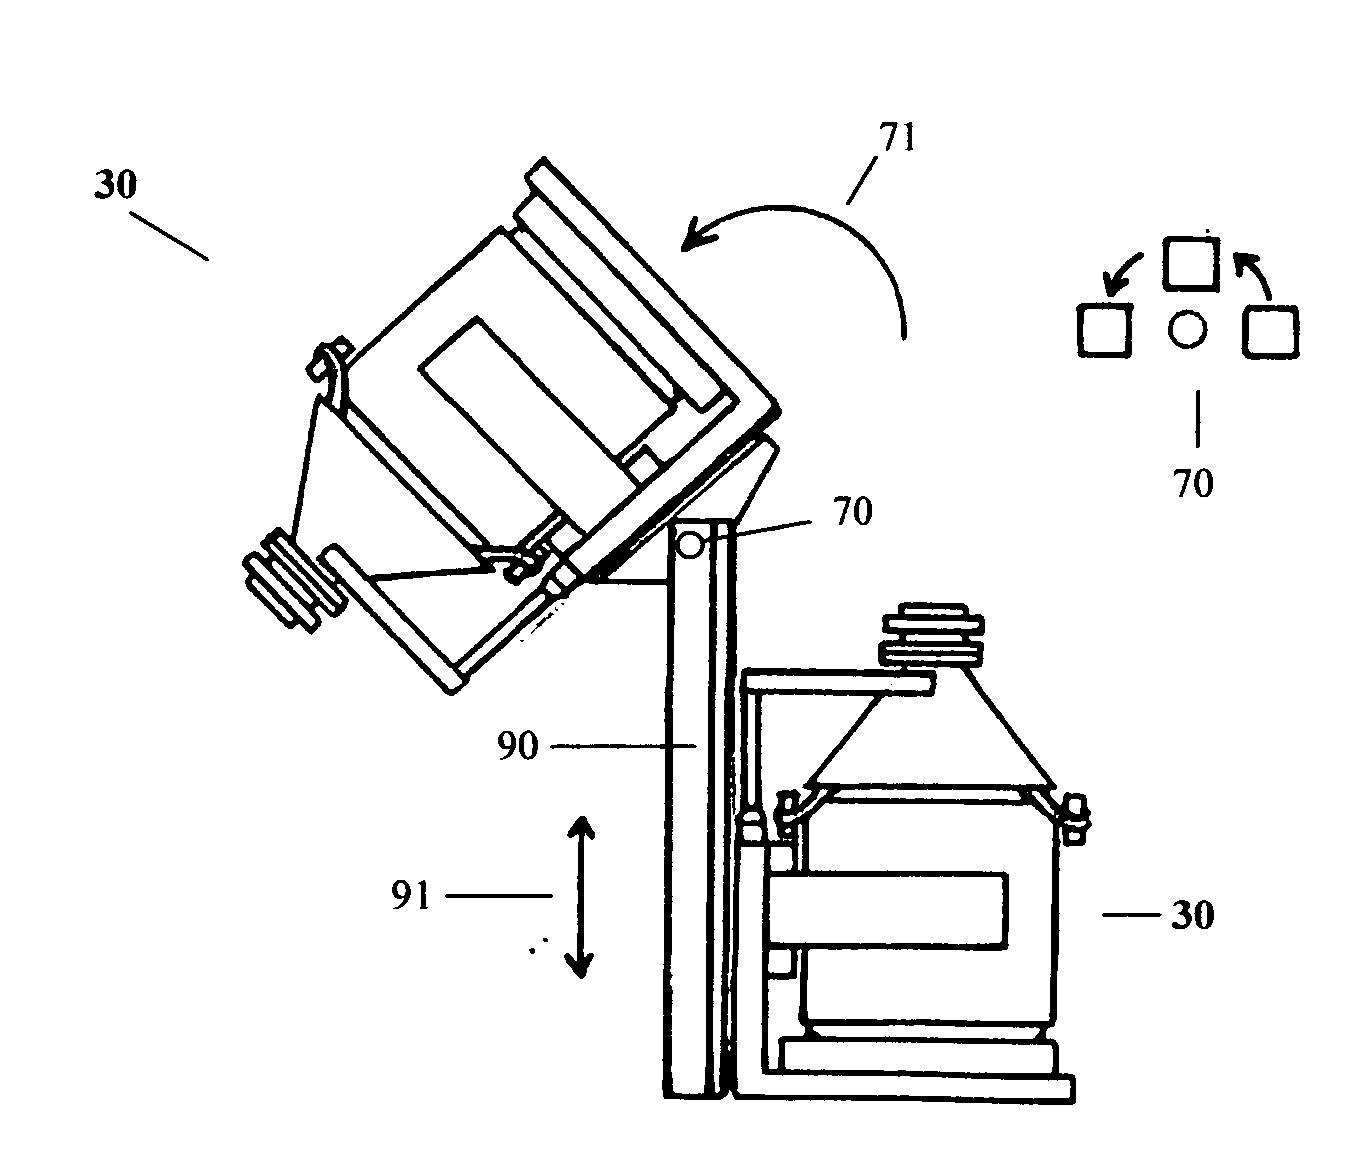 Apparatus for the discharge of product from a bulk bag